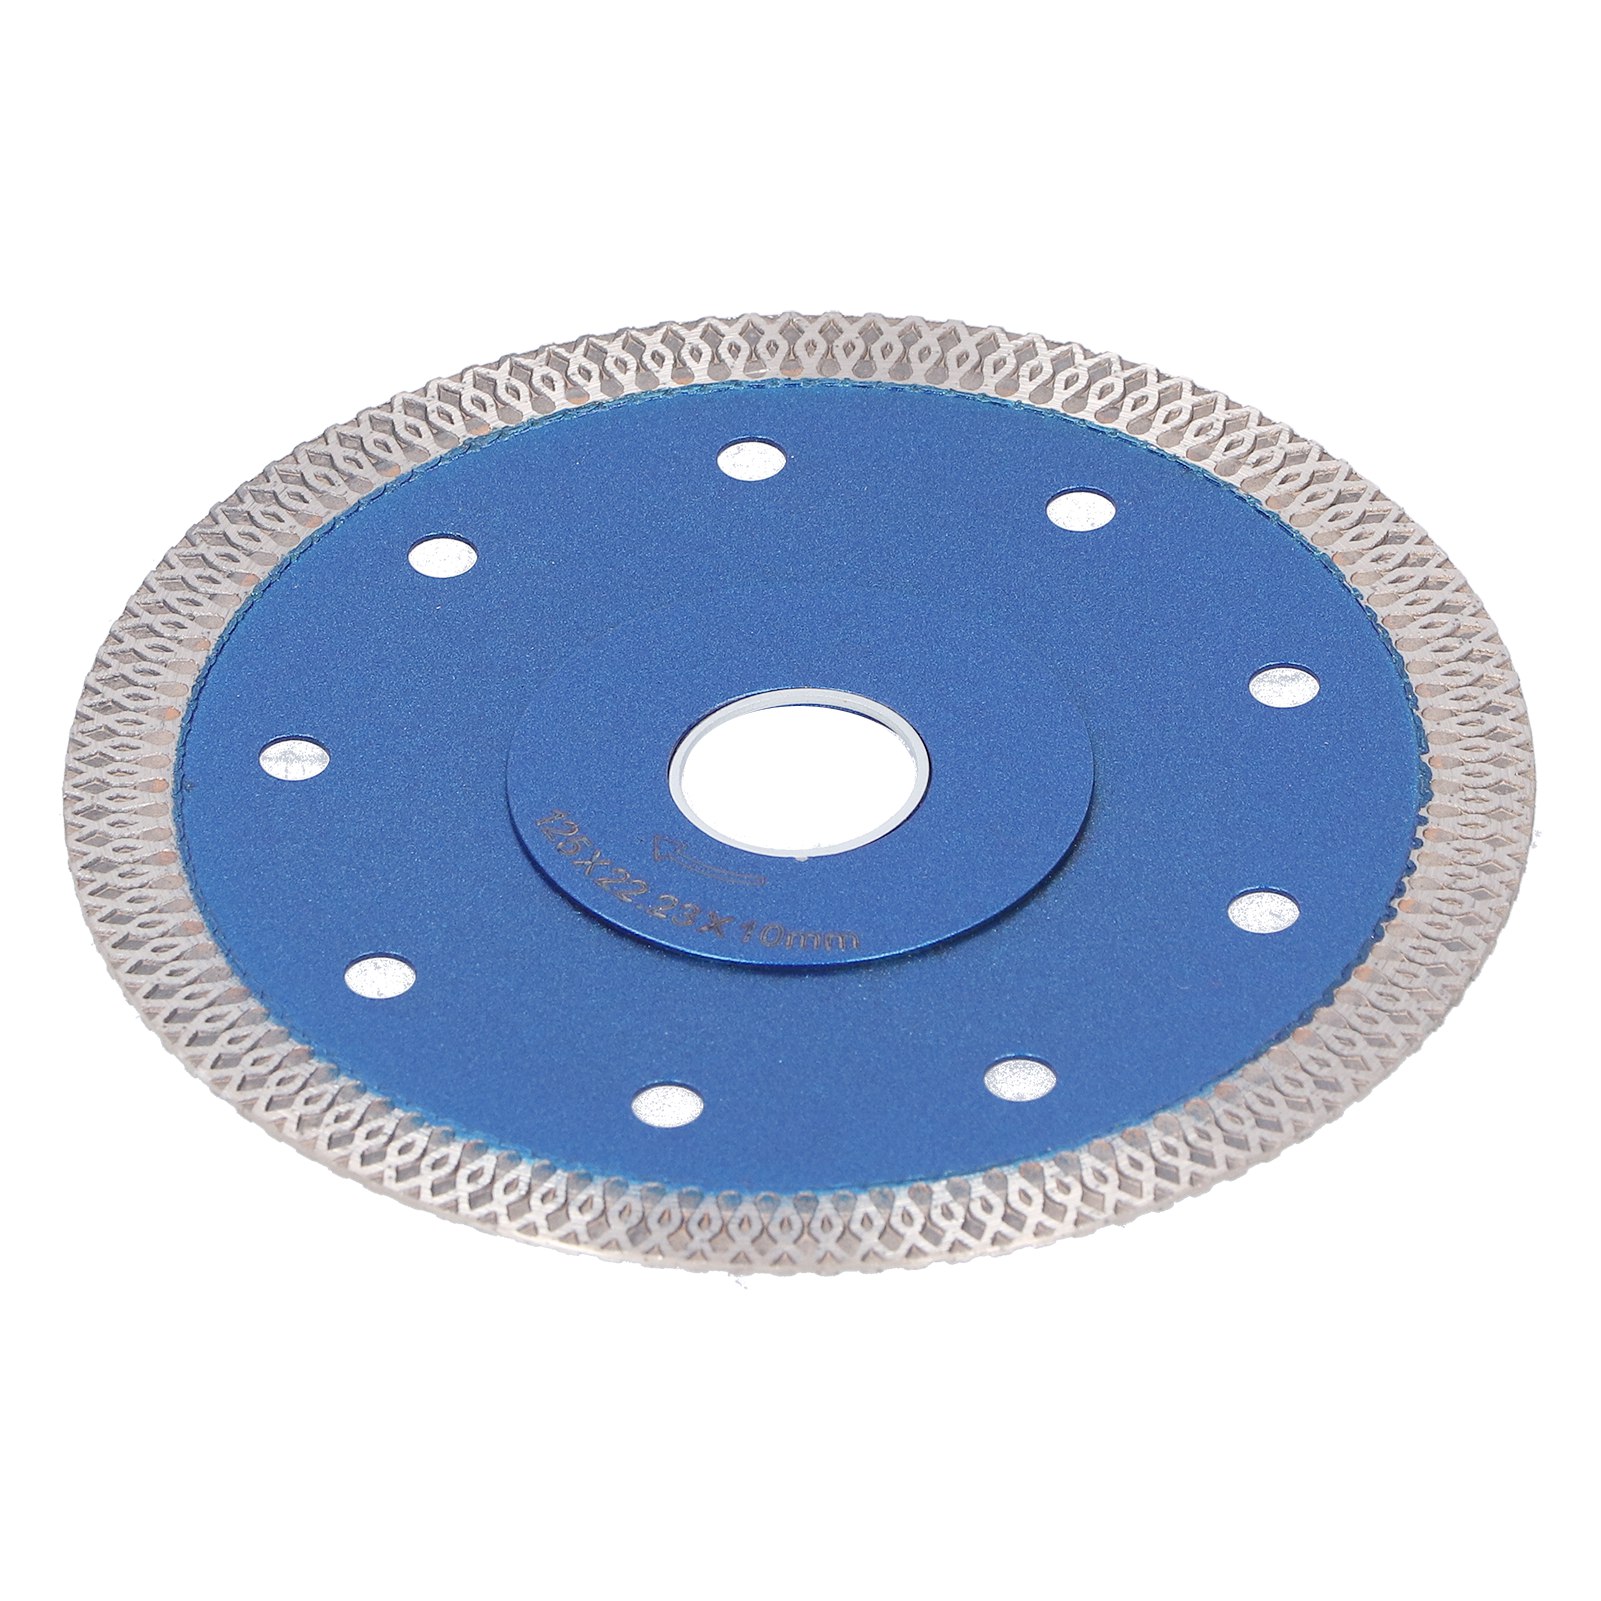 125mm Diamond Saw Blade Dry Wet Cutting Disc Cutting Tool for Porcelain ...